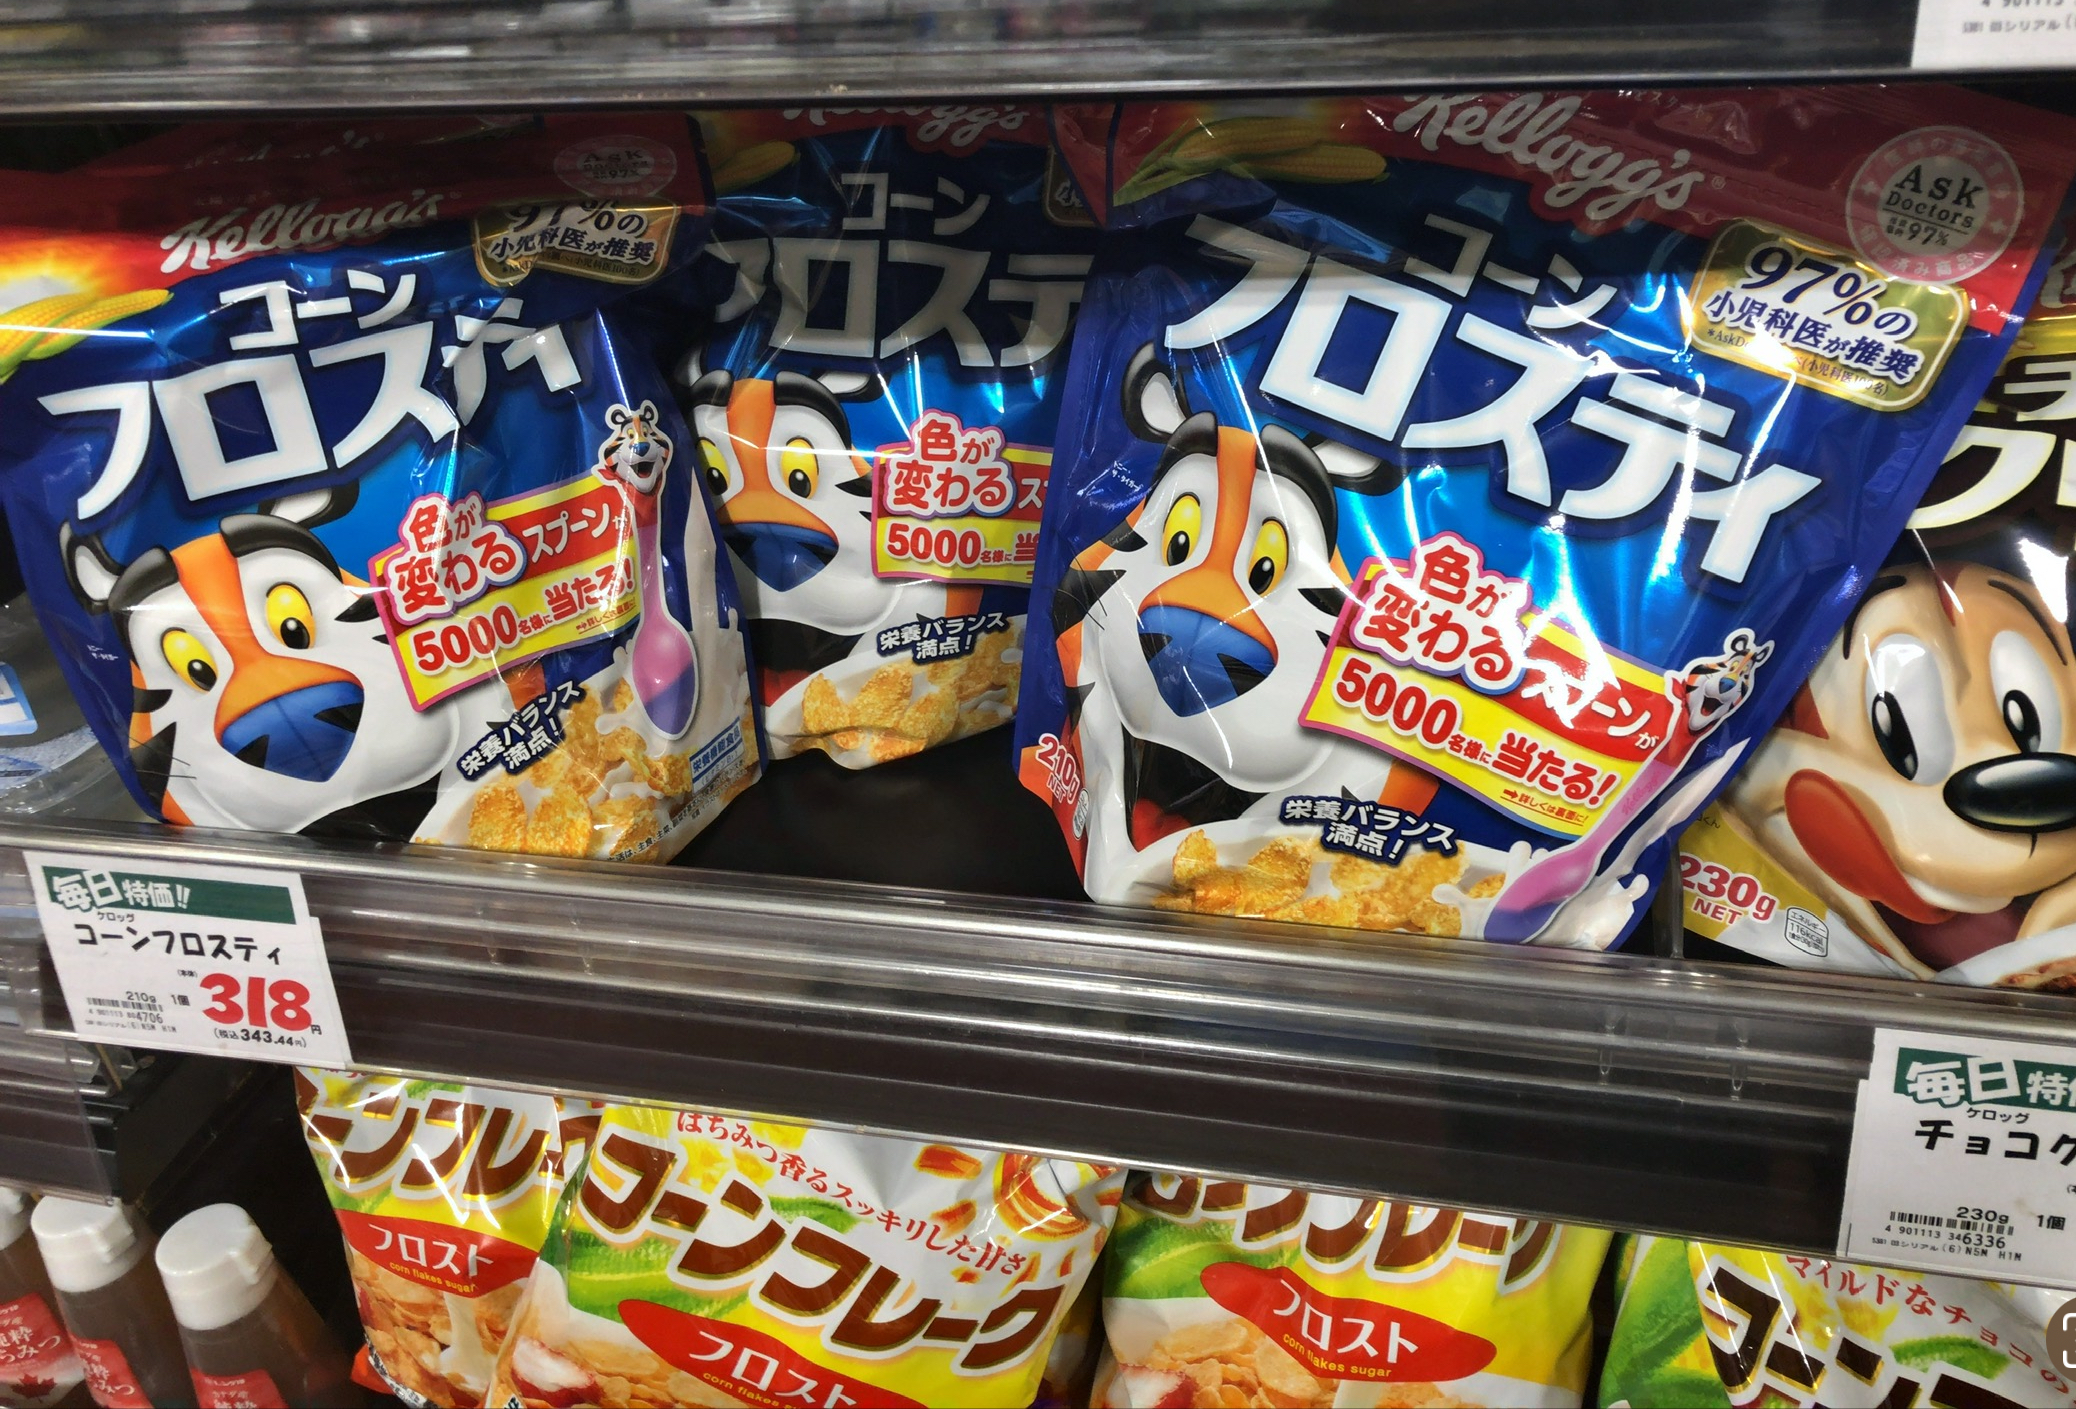 Frosted flakes are sold in Japan